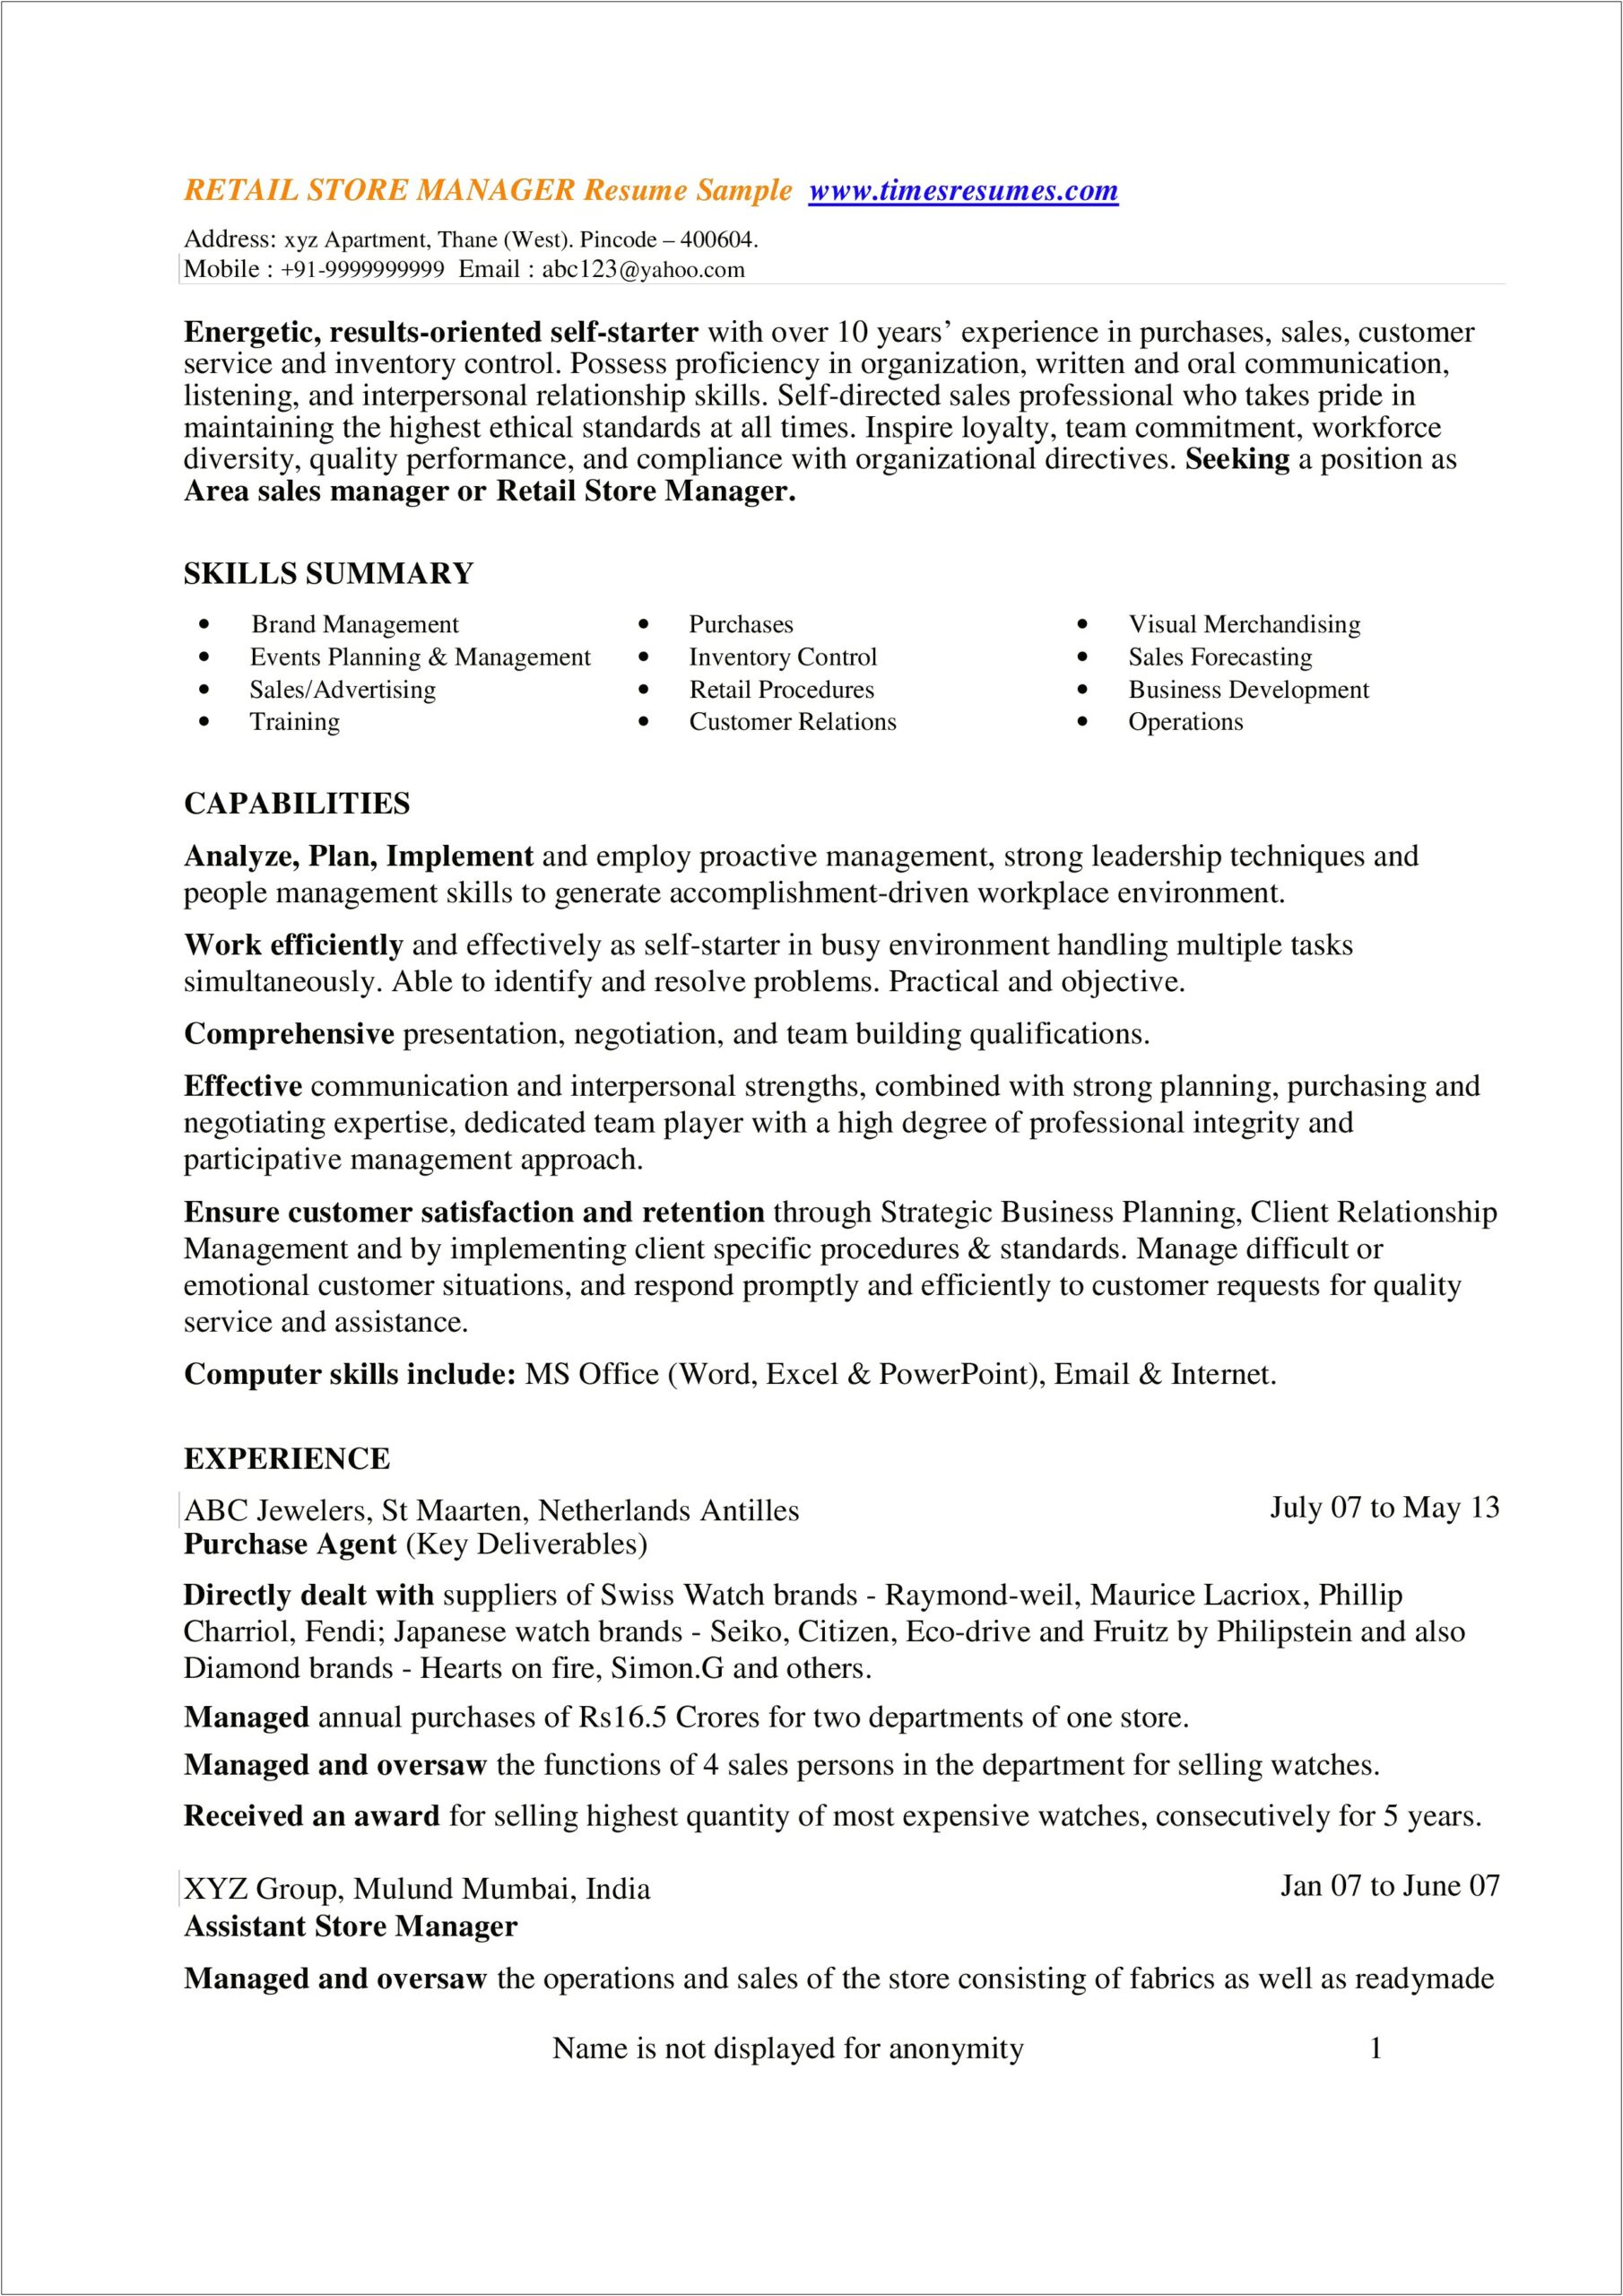 Retail Management Experience Sample Resume